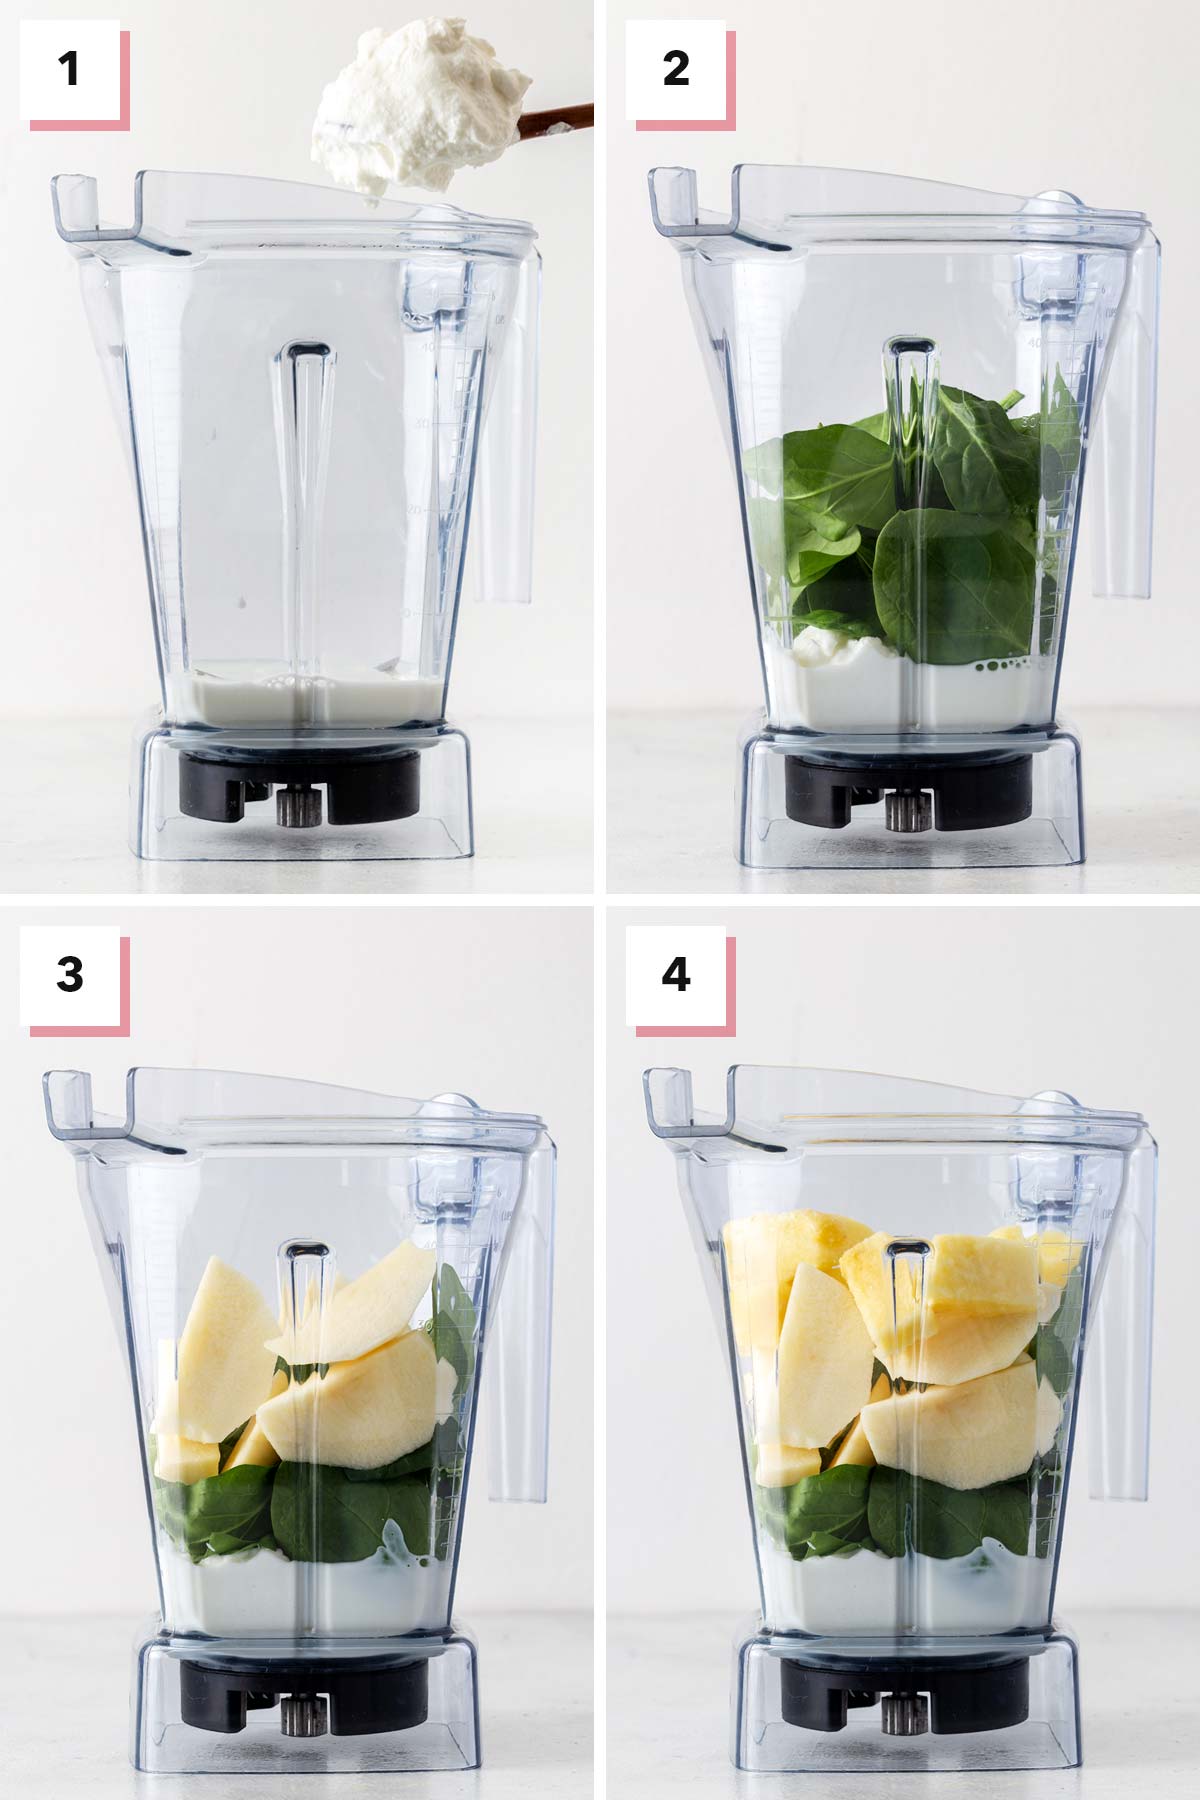 Steps to make a spinach smoothie.